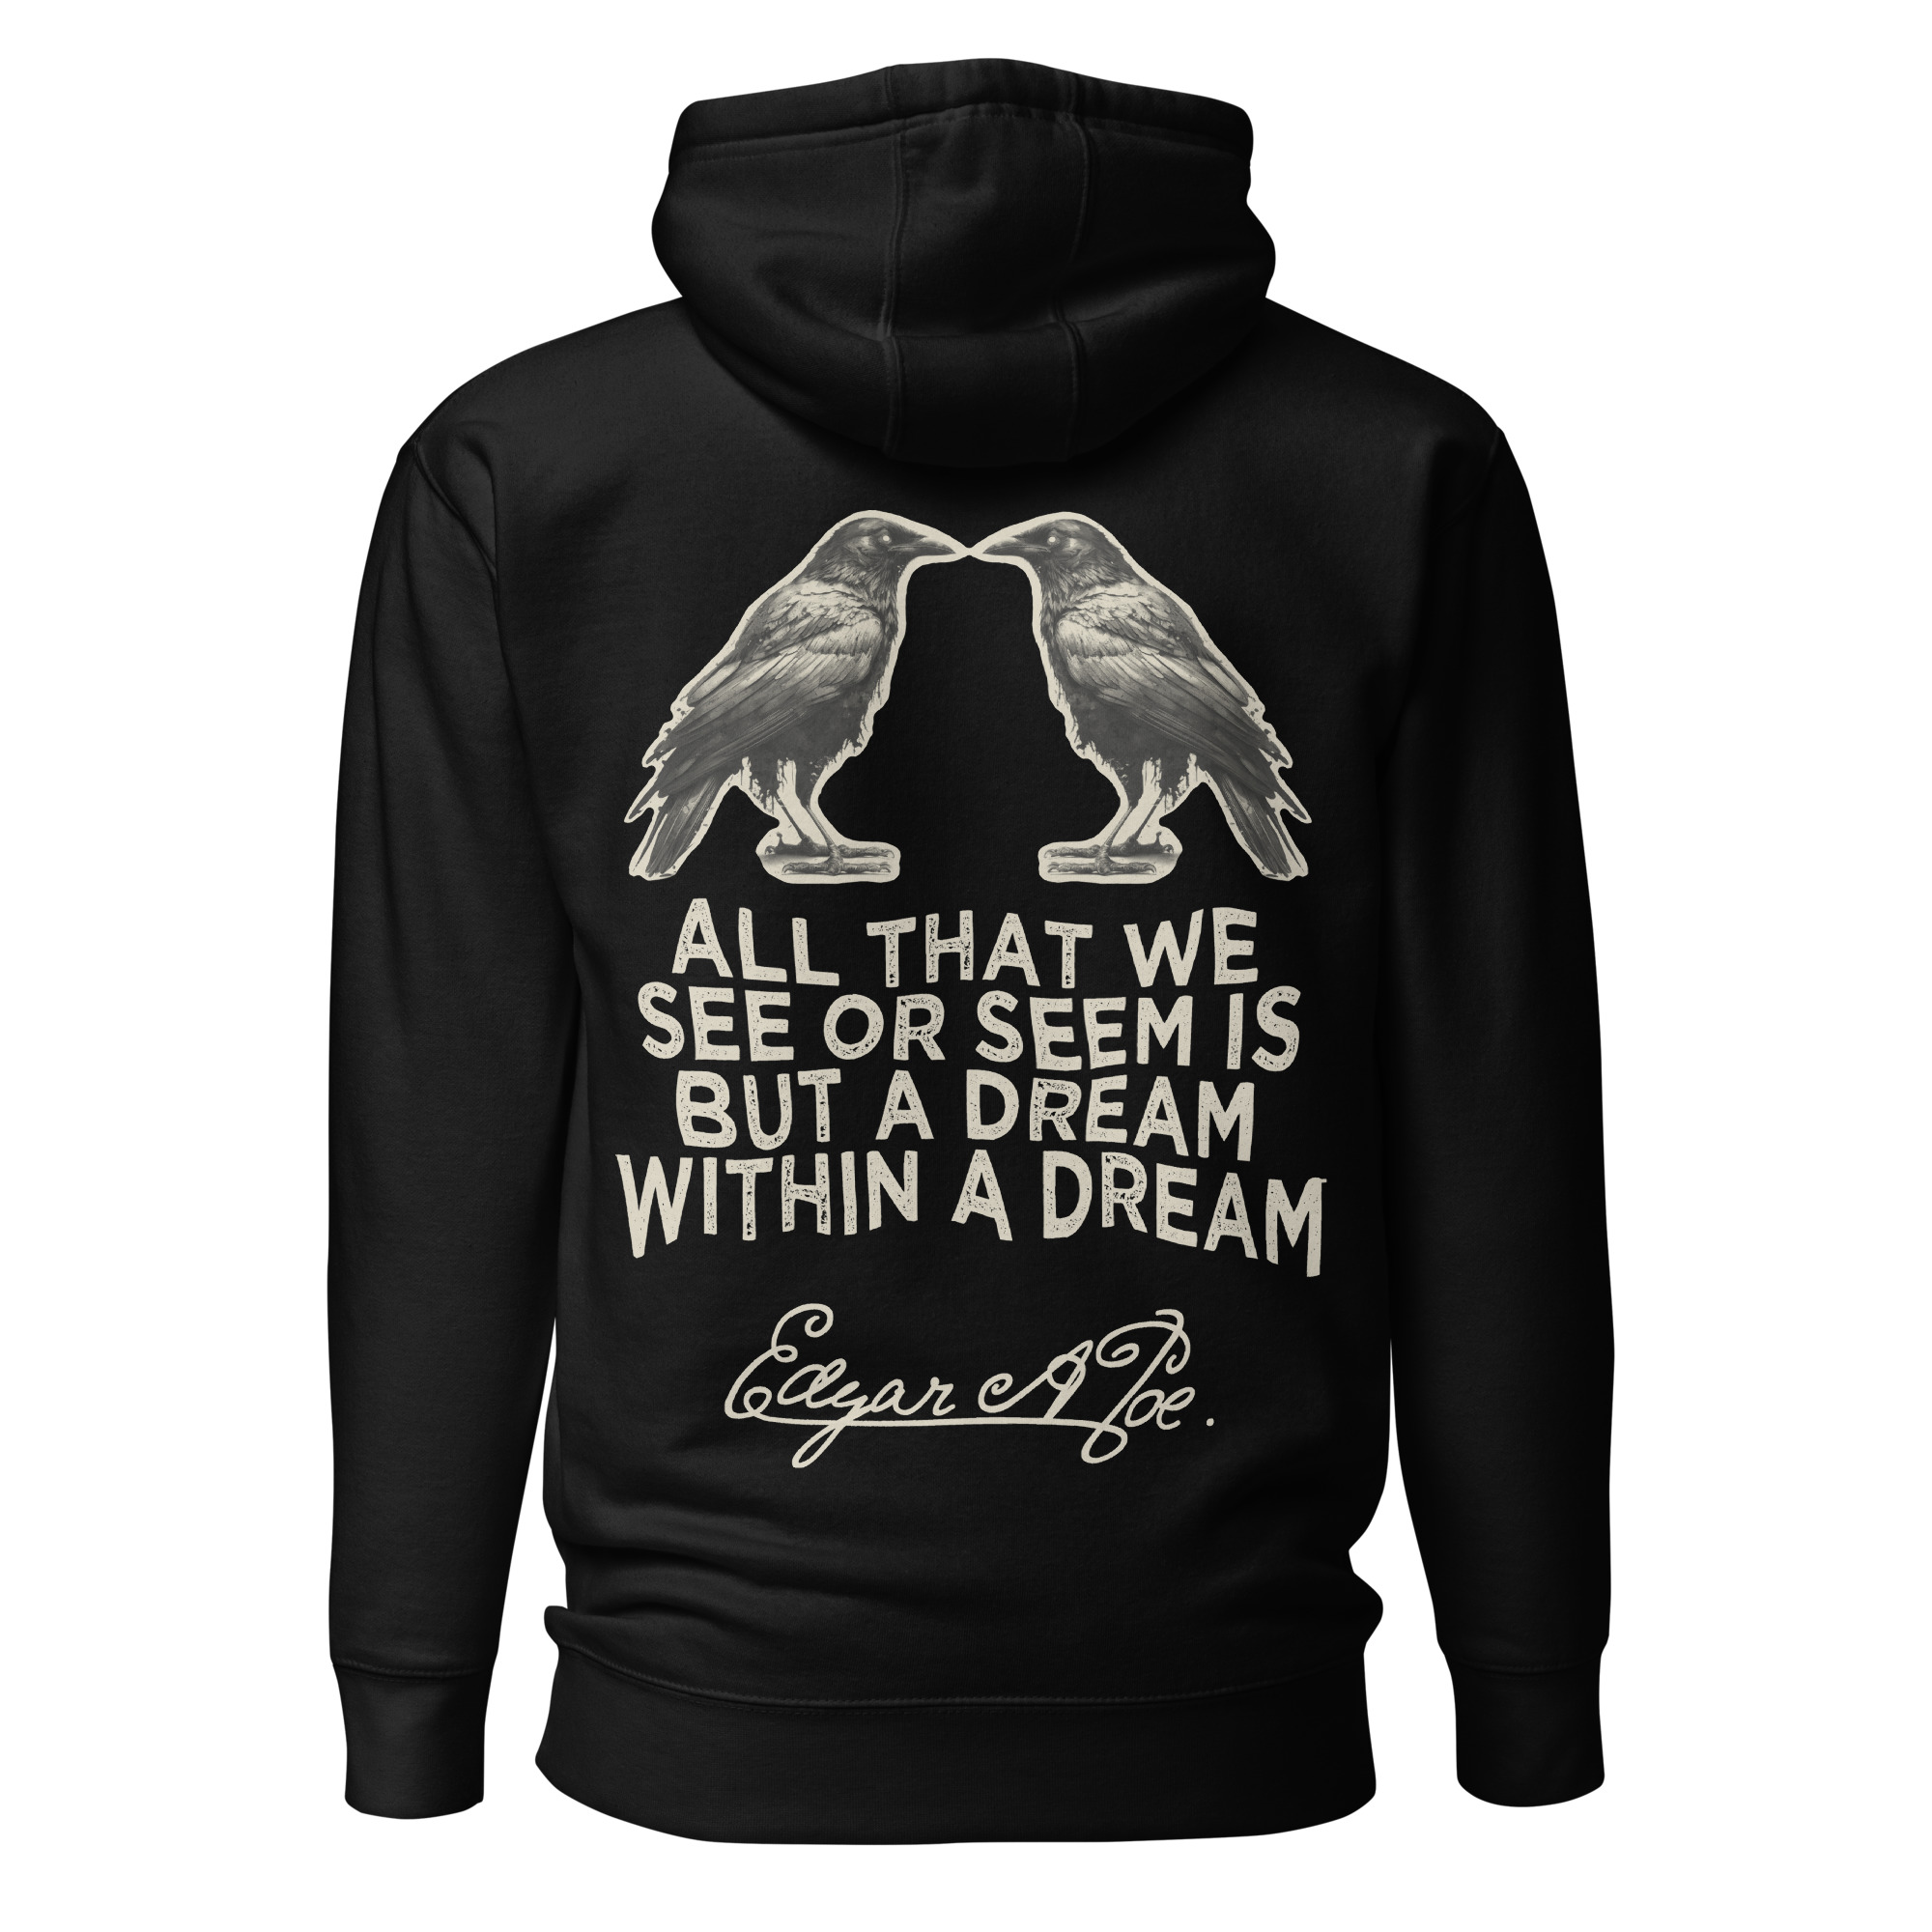 All that we see, E.A.Poe - Unisex Hoodie